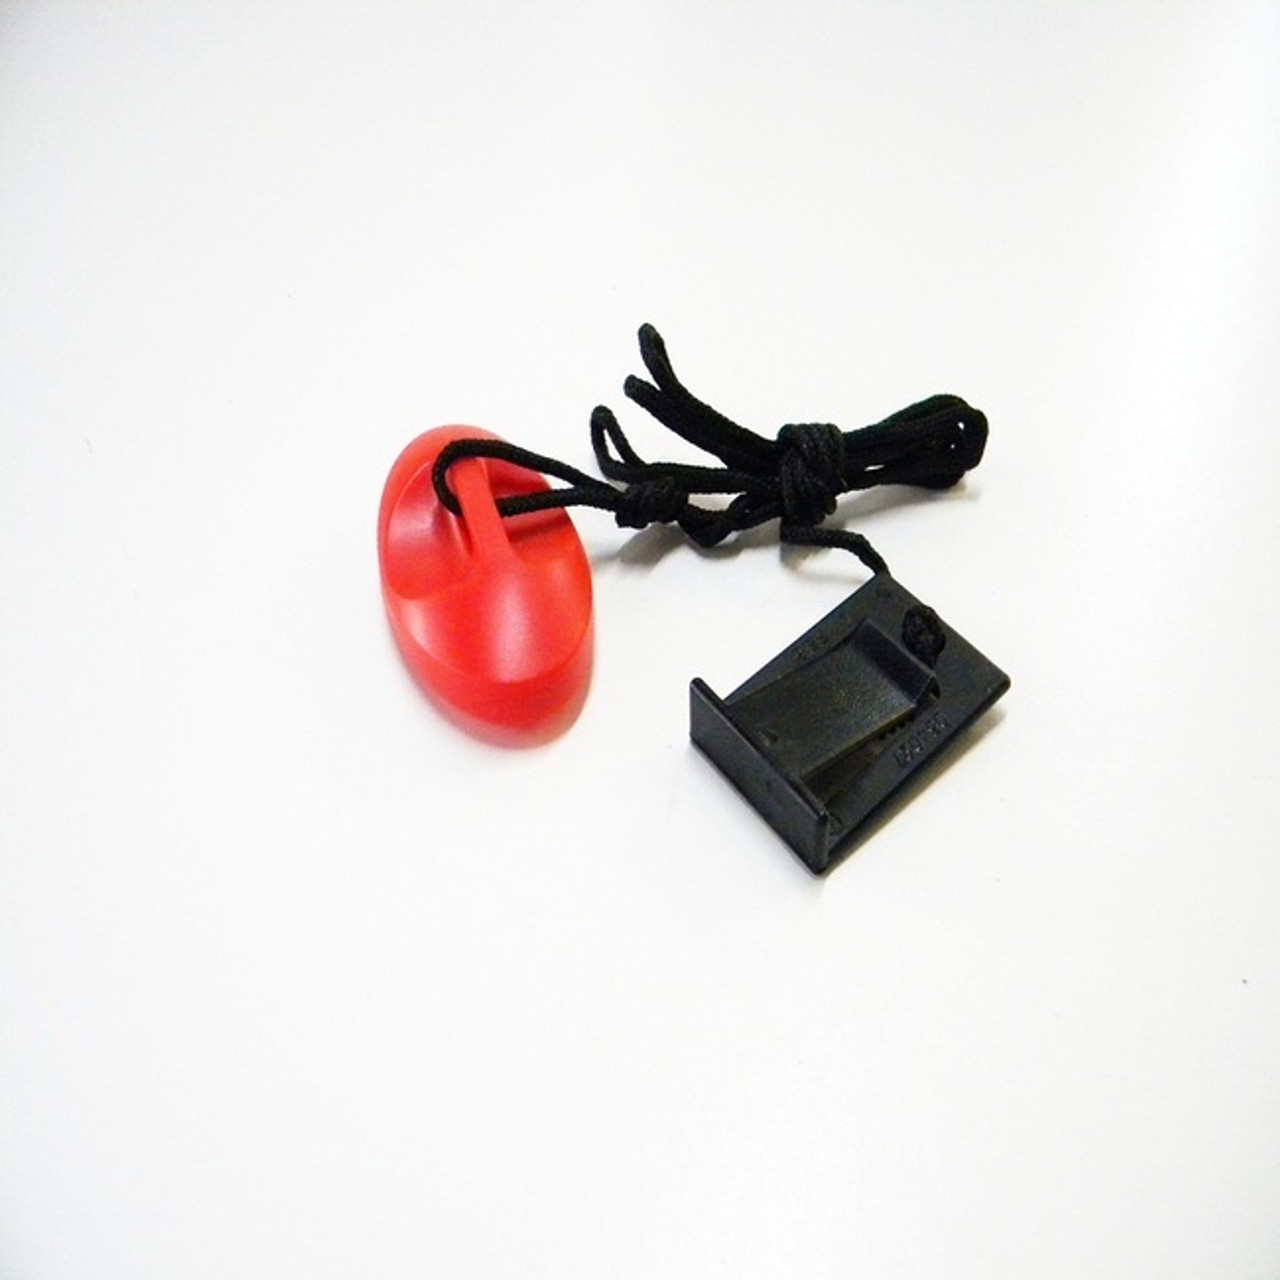 Nordic Track Treadmill Model NTL140102  COMMERCIAL 1750 Safety Key Clip Part Number 303713